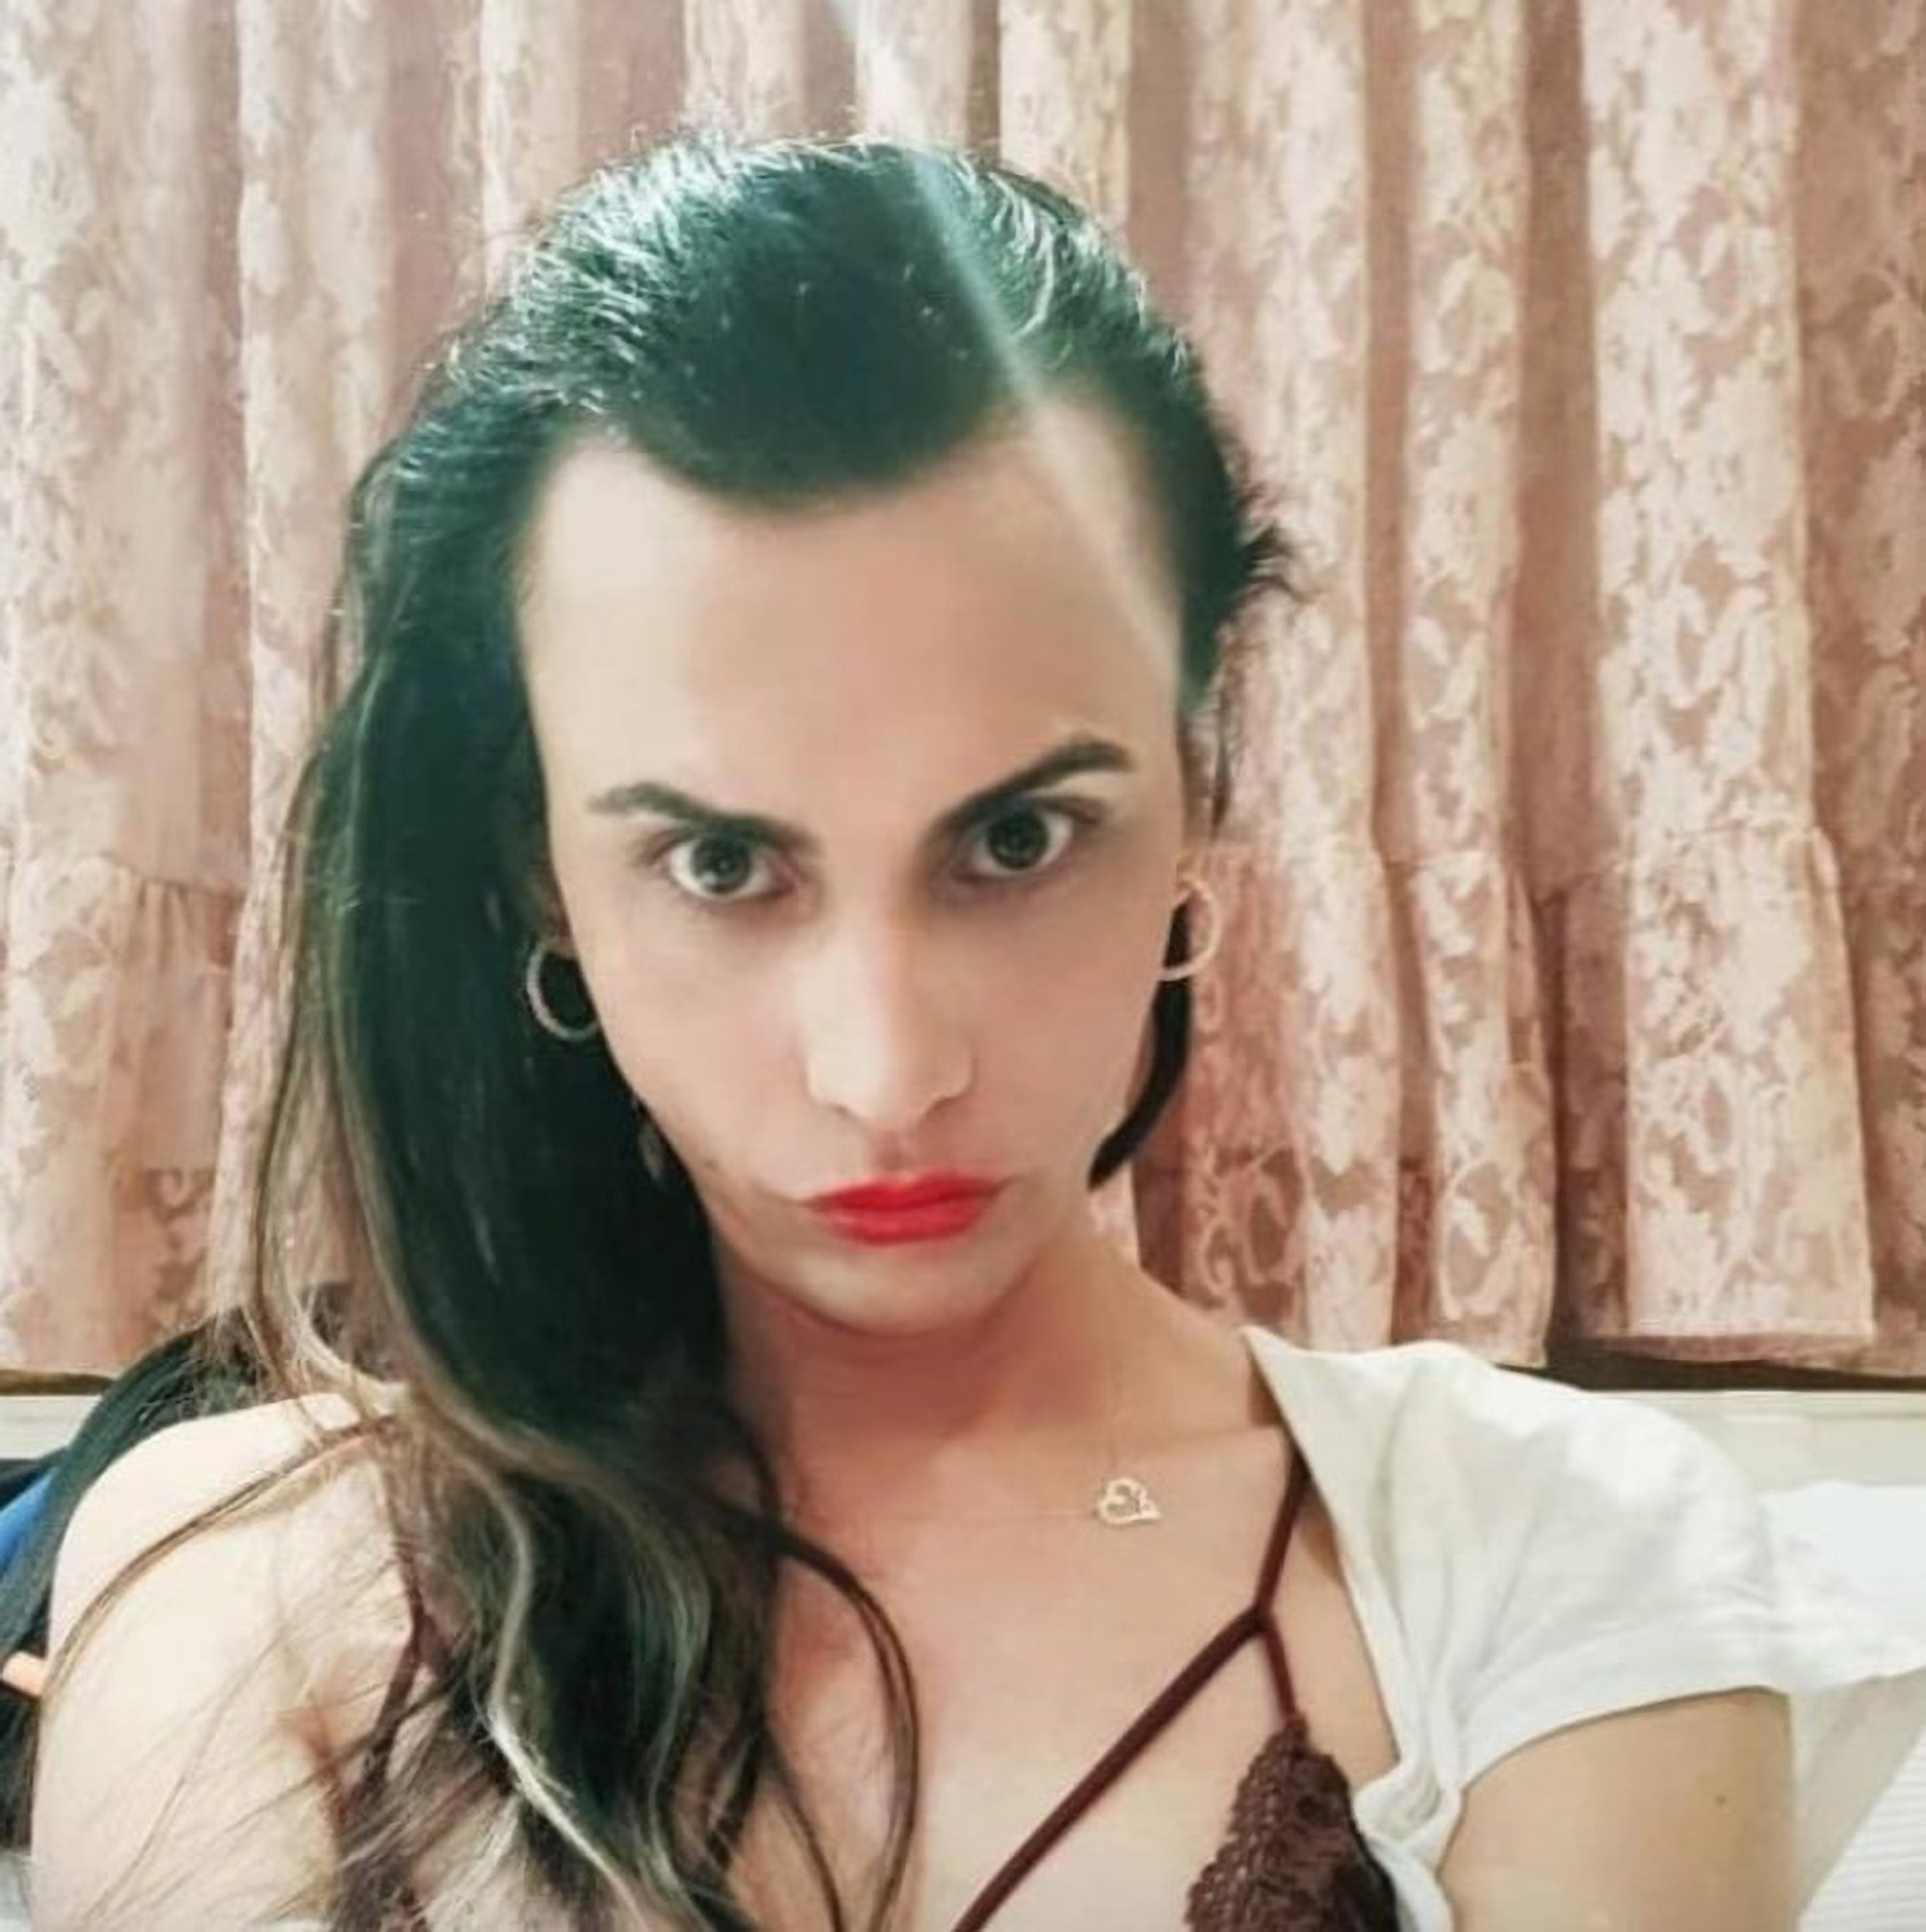 Dead Body Of Trans Woman Found Wrapped In Sheet In Sofa Bed